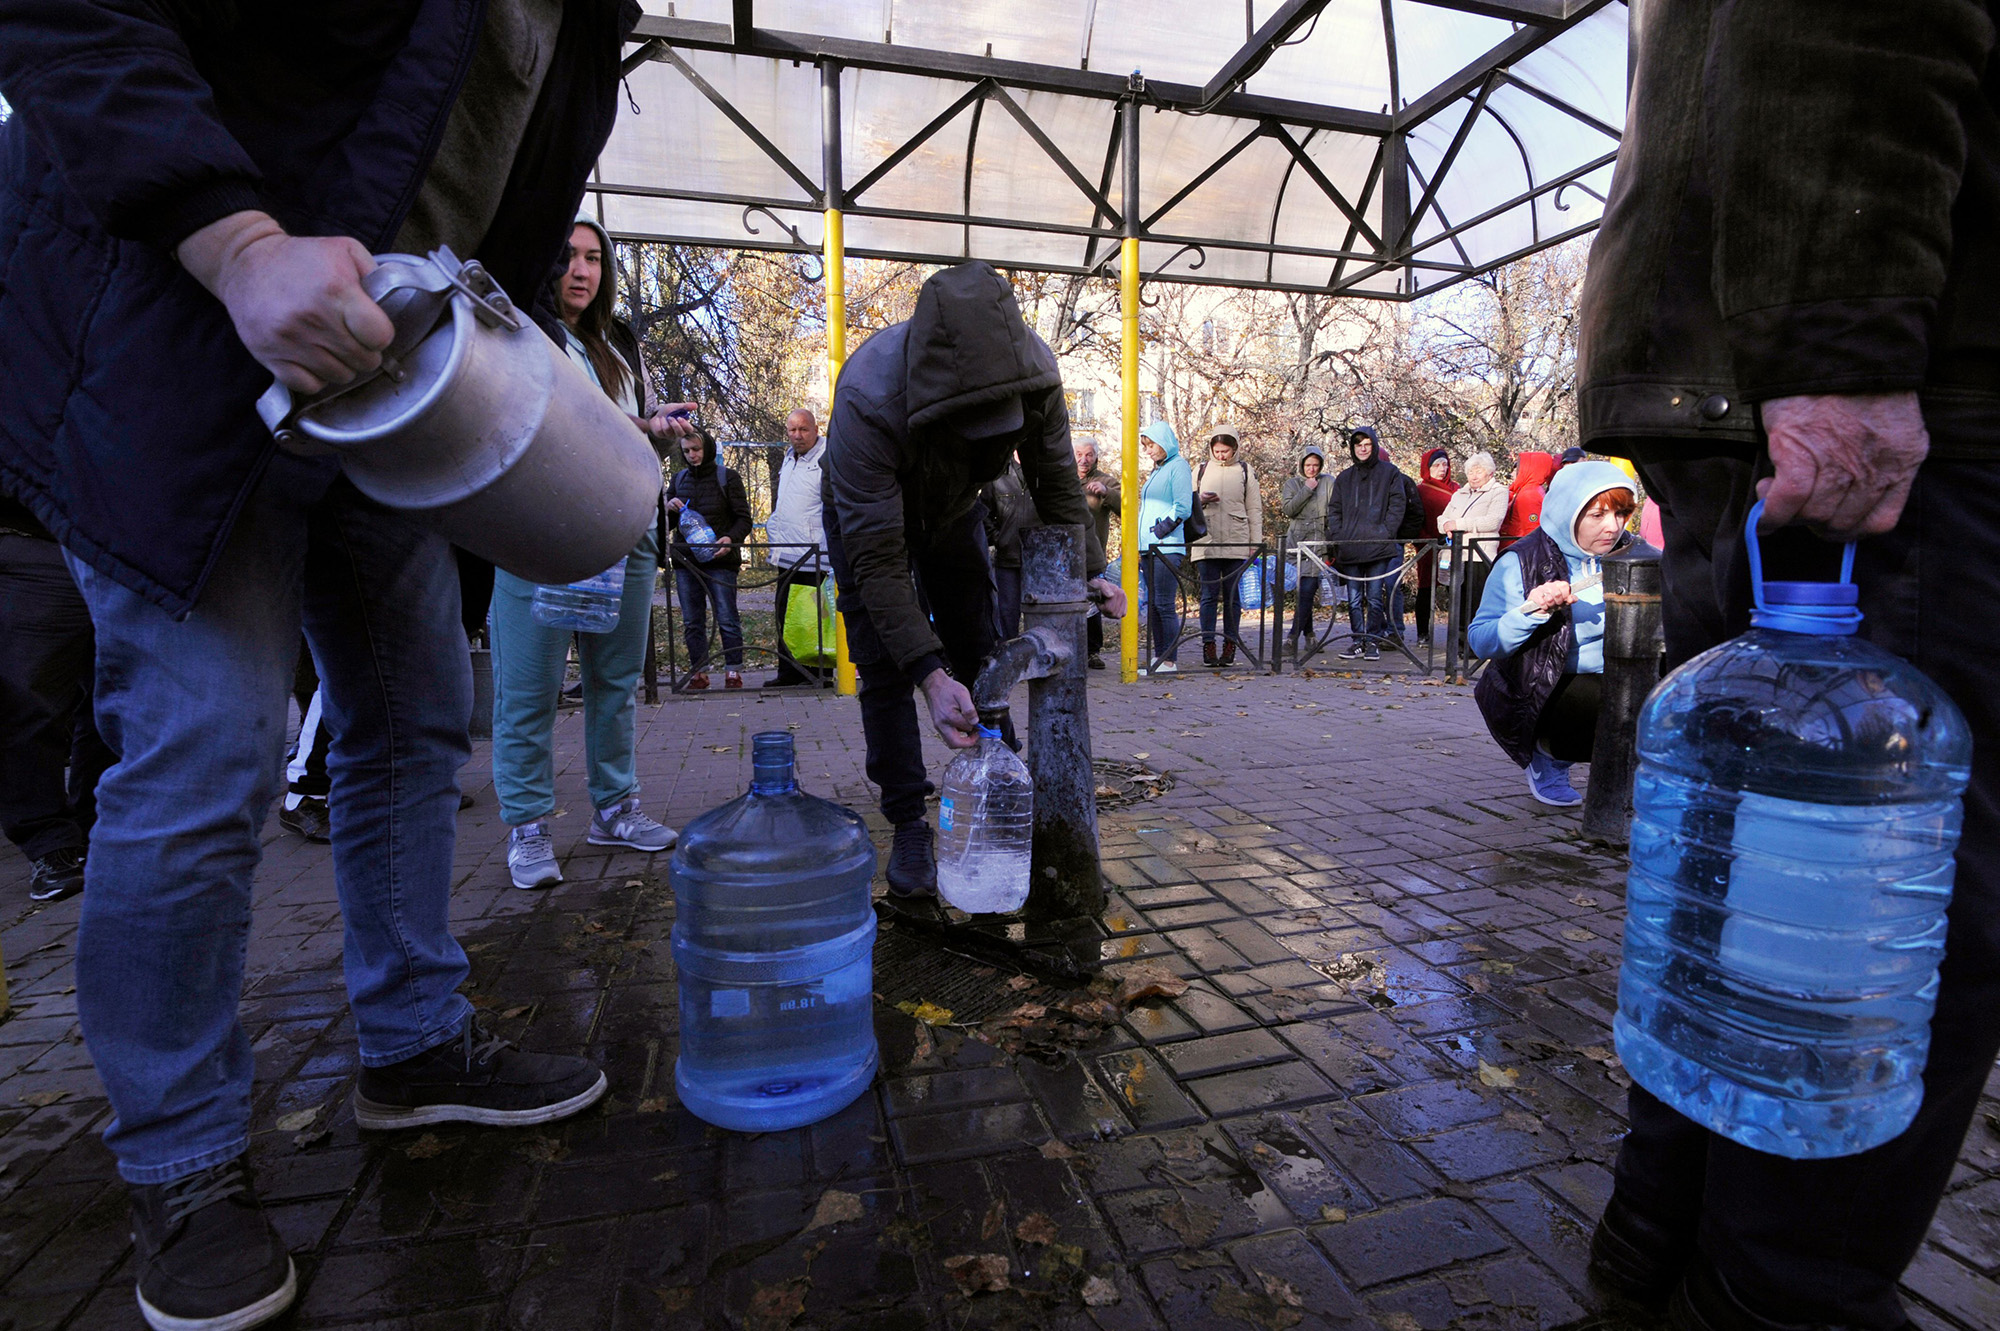 Local residents wait in line to collect water from a public water pump in a park in Kyiv, Ukraine, on October 31.